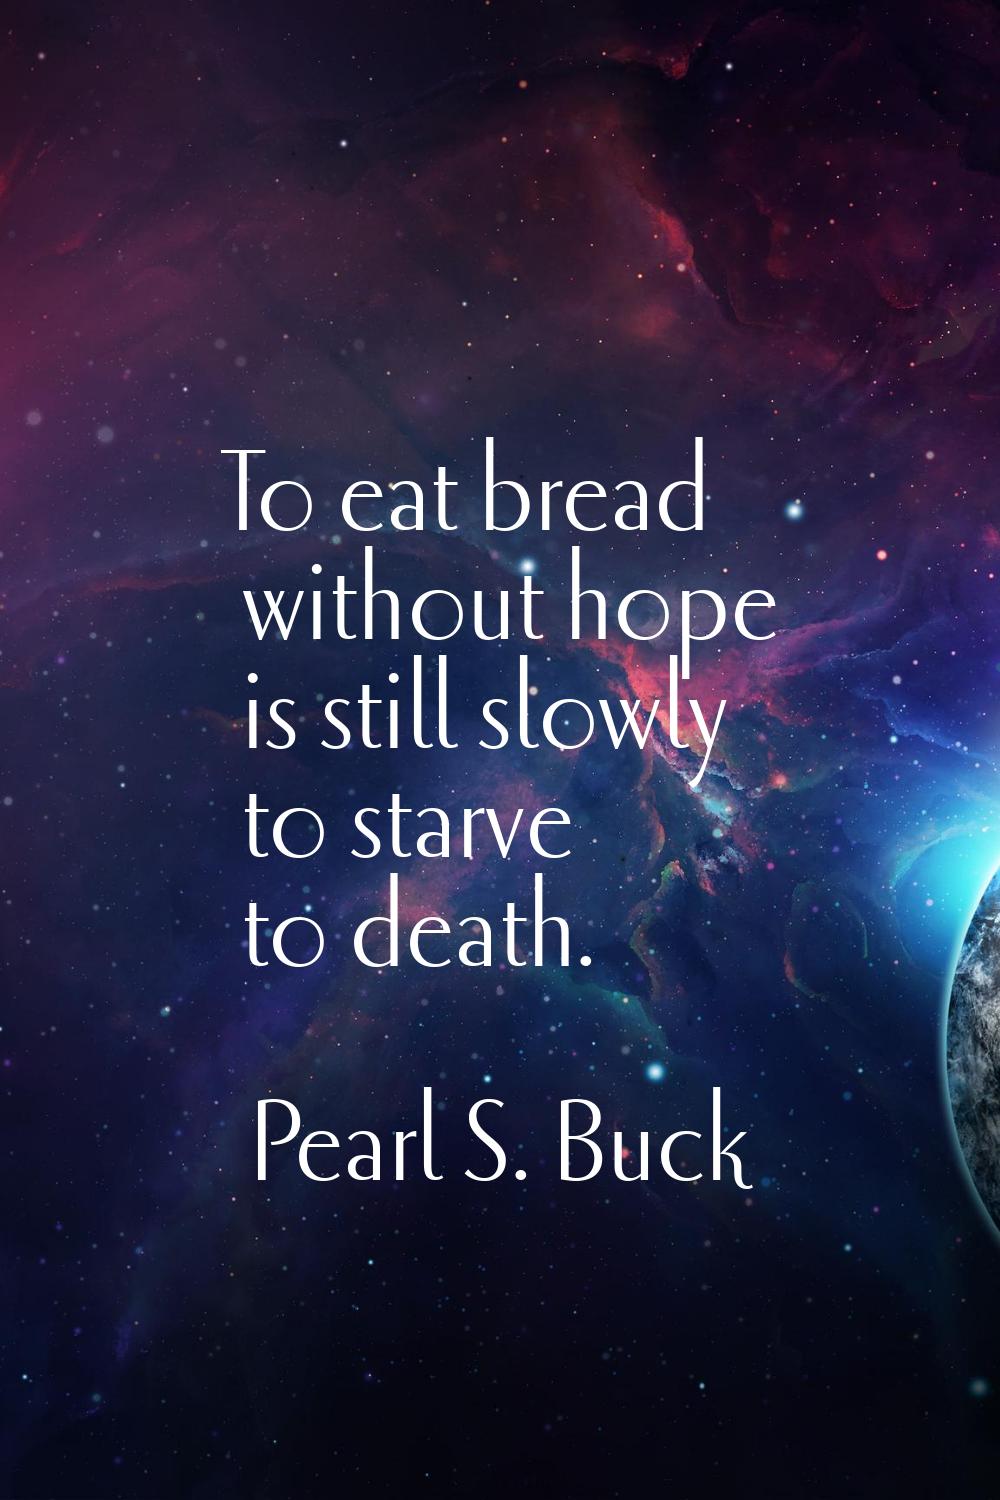 To eat bread without hope is still slowly to starve to death.